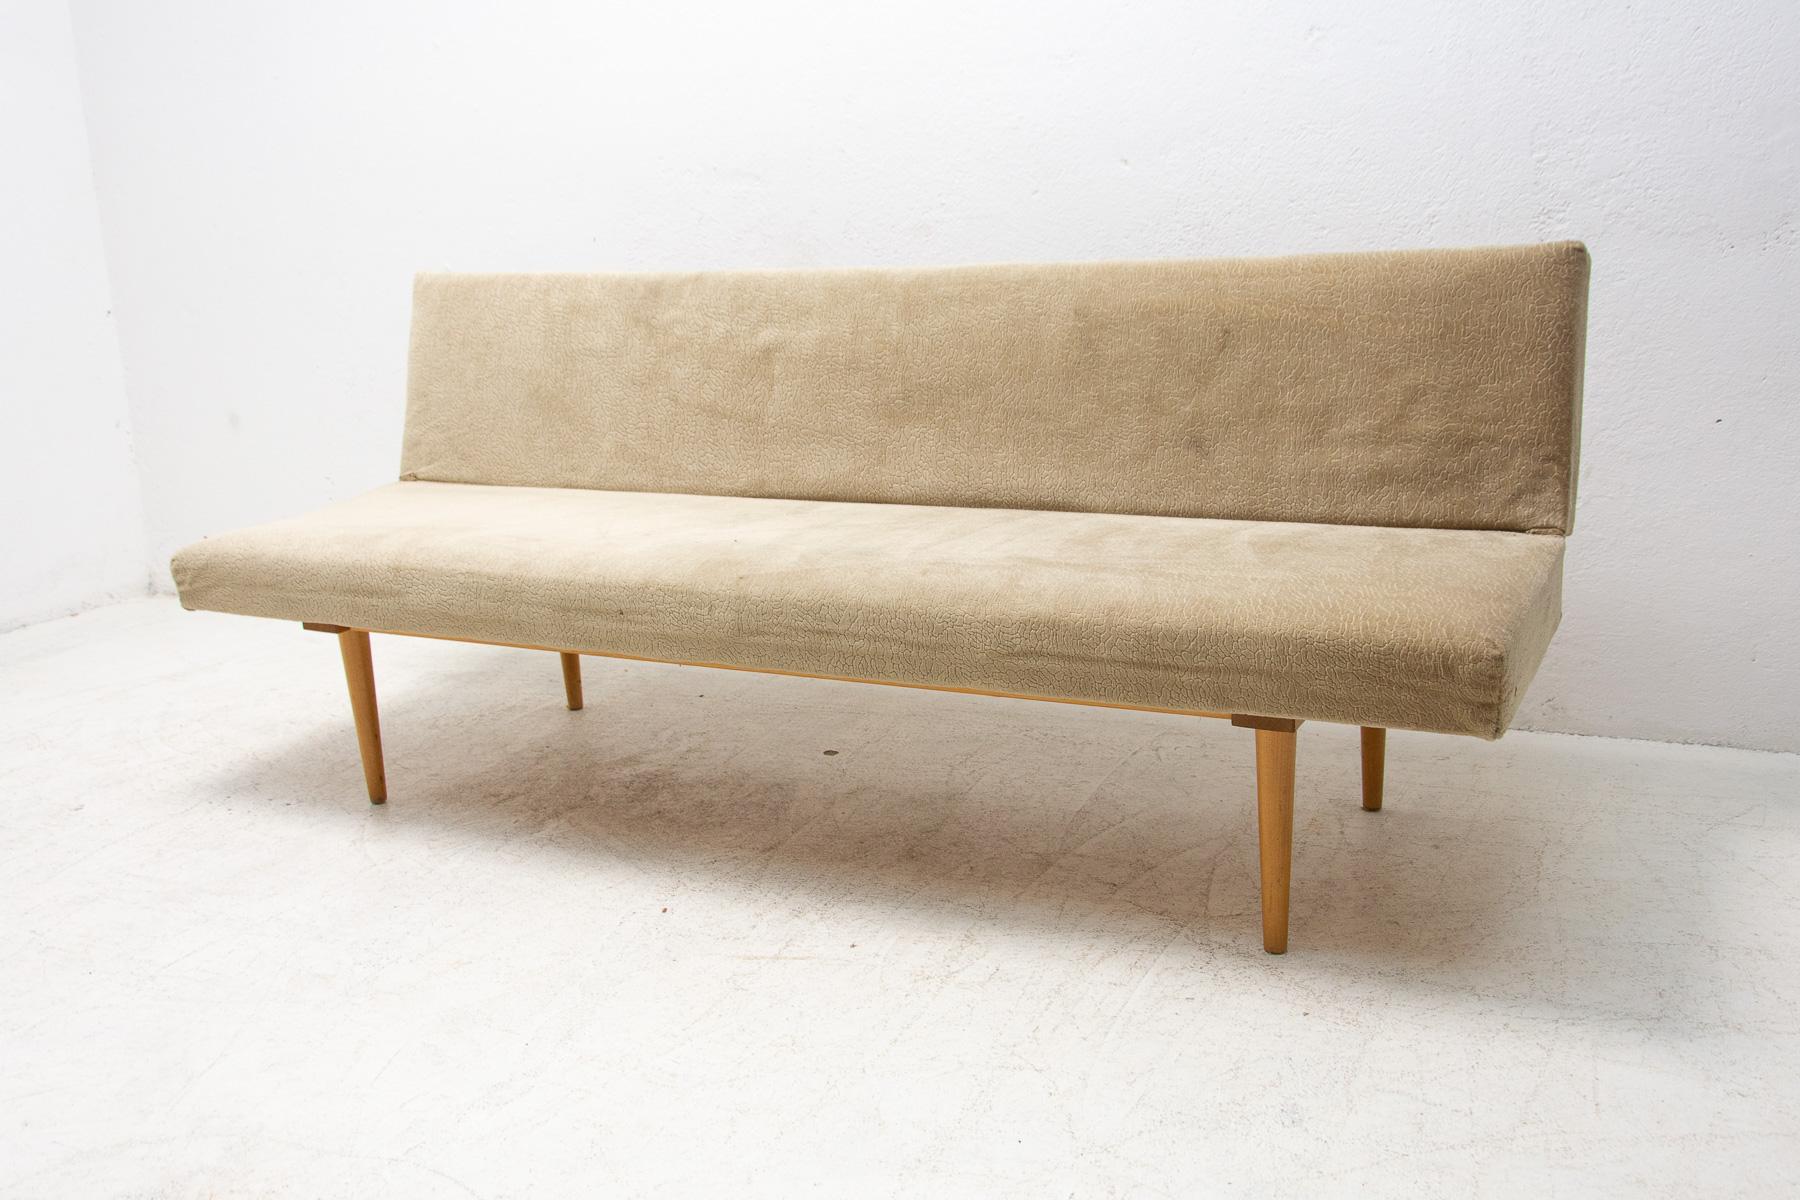 Mid century sofa/daybed, made in the former Czechoslovakia in the 1960´s, designed by Miroslav Navrátil. Material: beech wood, fabric. The sofa is structurally in good Vintage condition, the fabric bears signs of age and using.

Measures: Height: